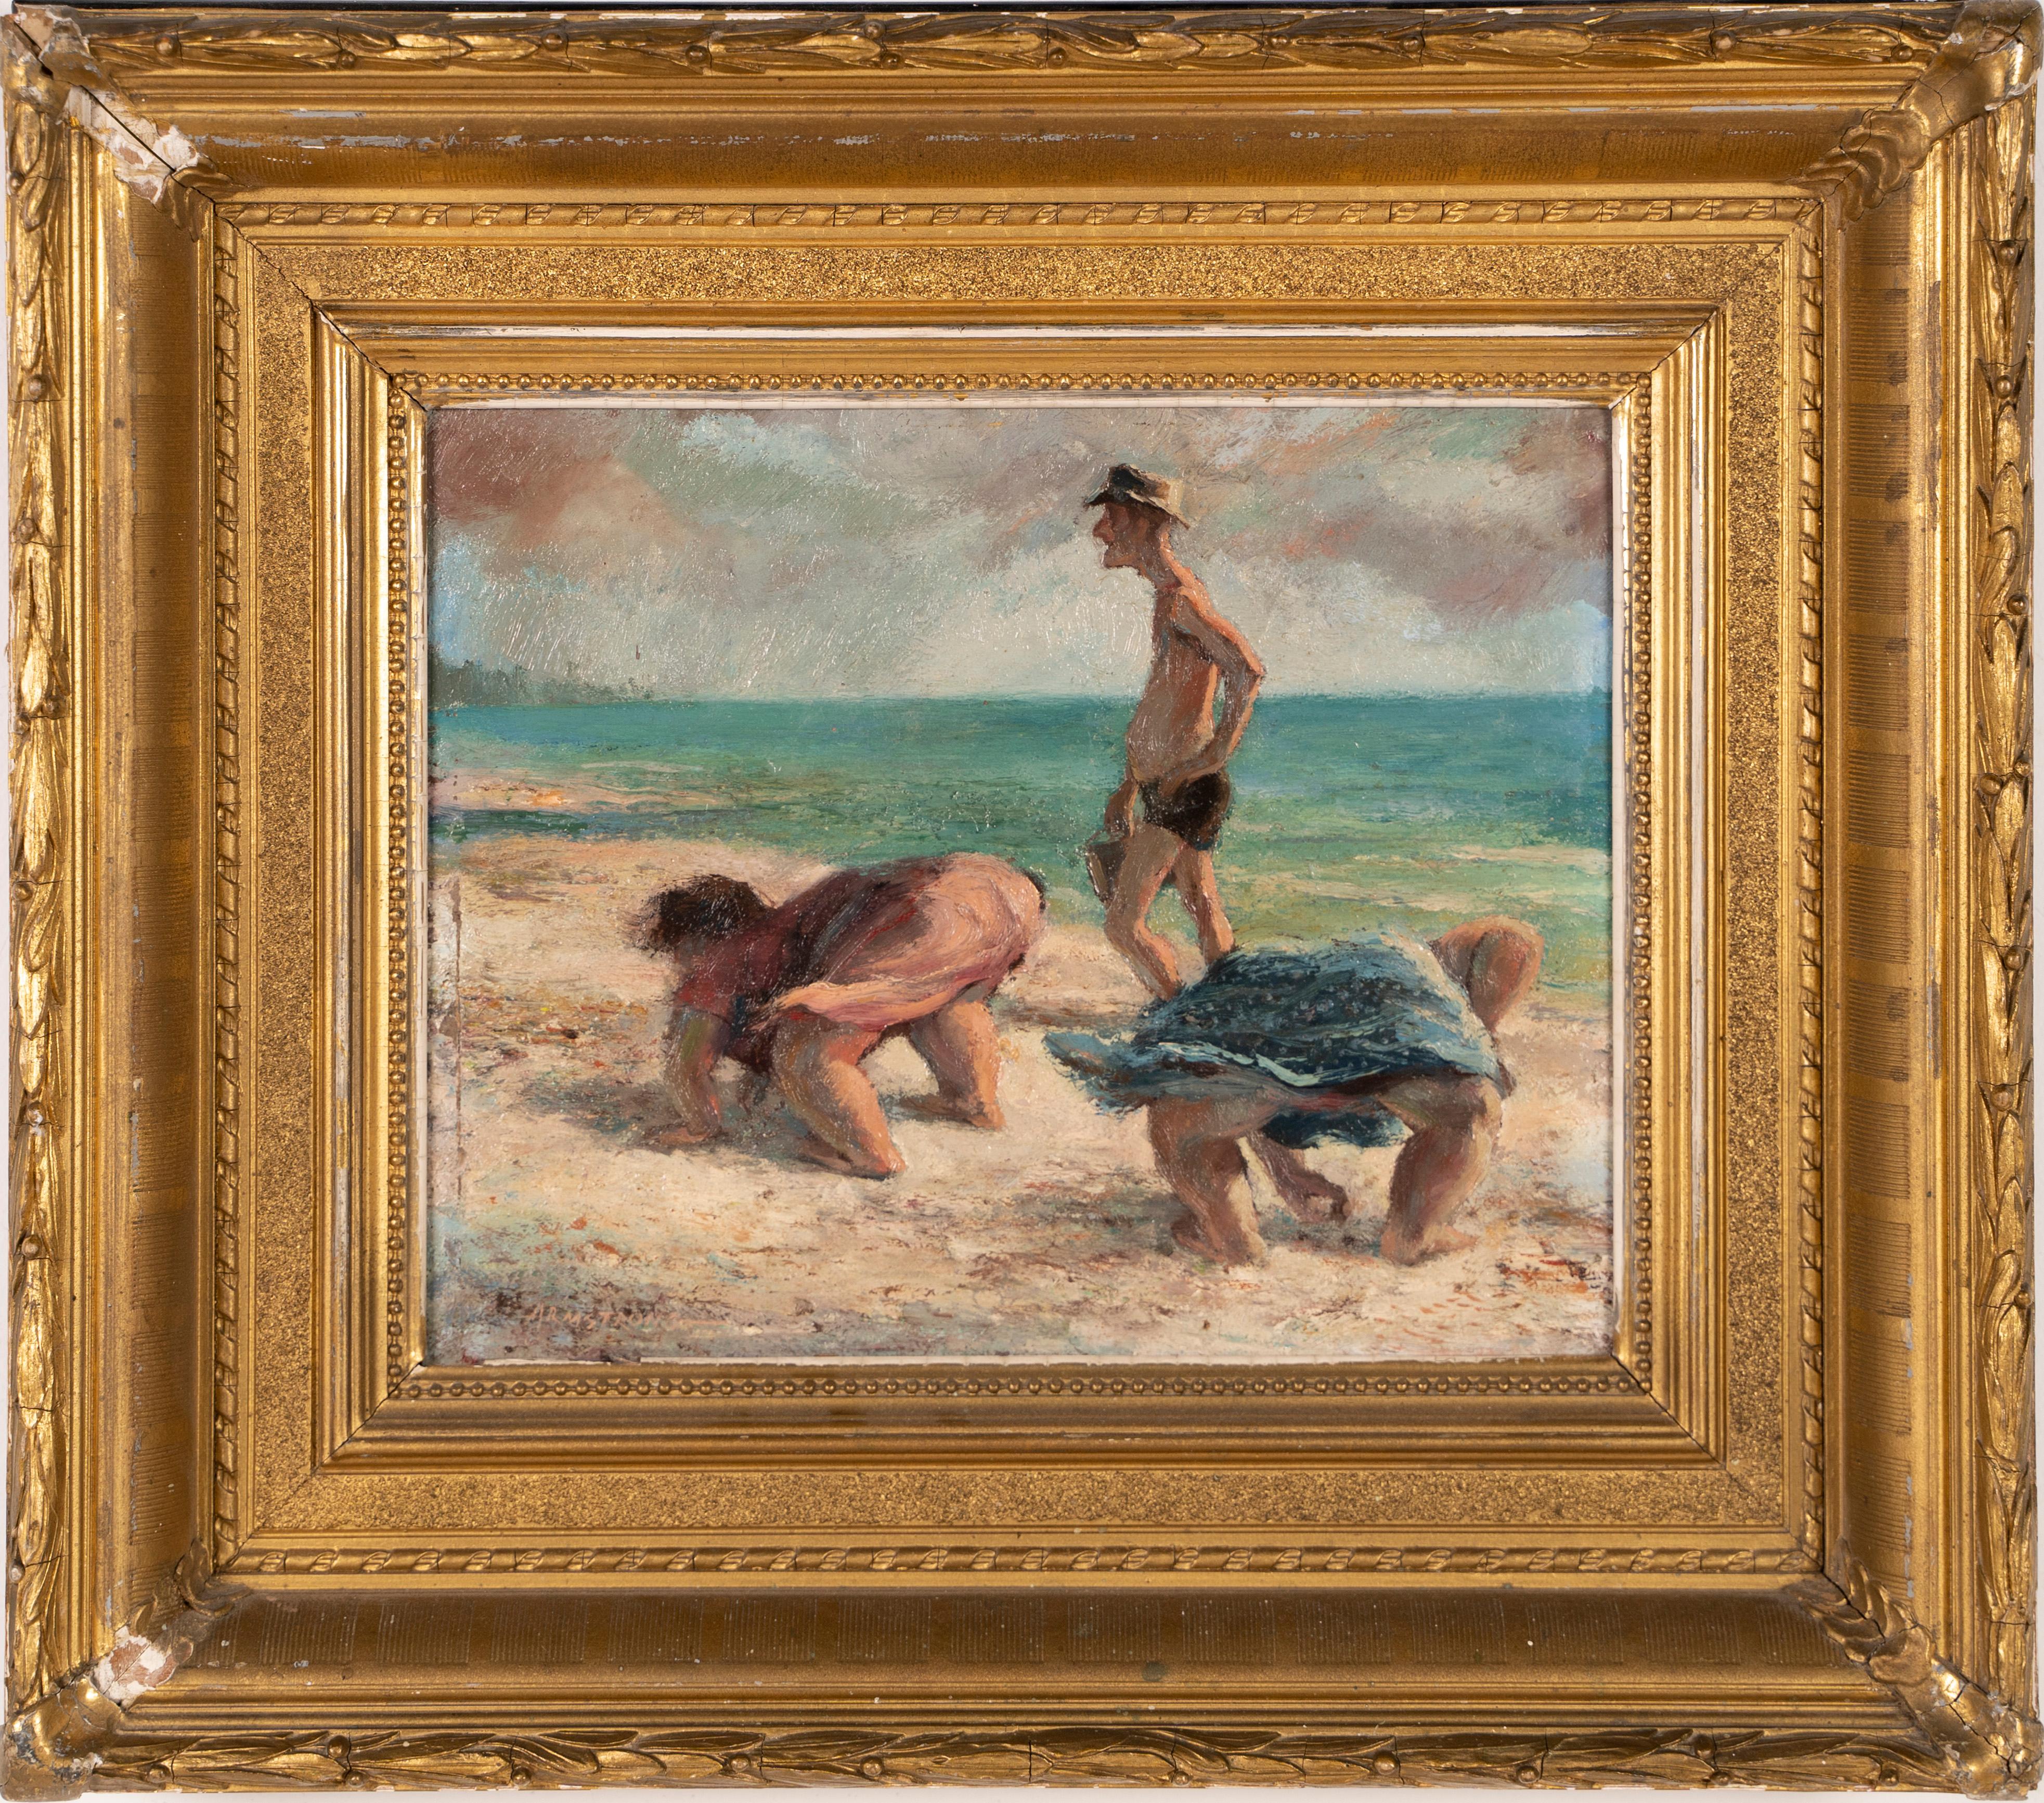 Antique American School Modernist Florida Beach Comber Ashcan Oil Painting